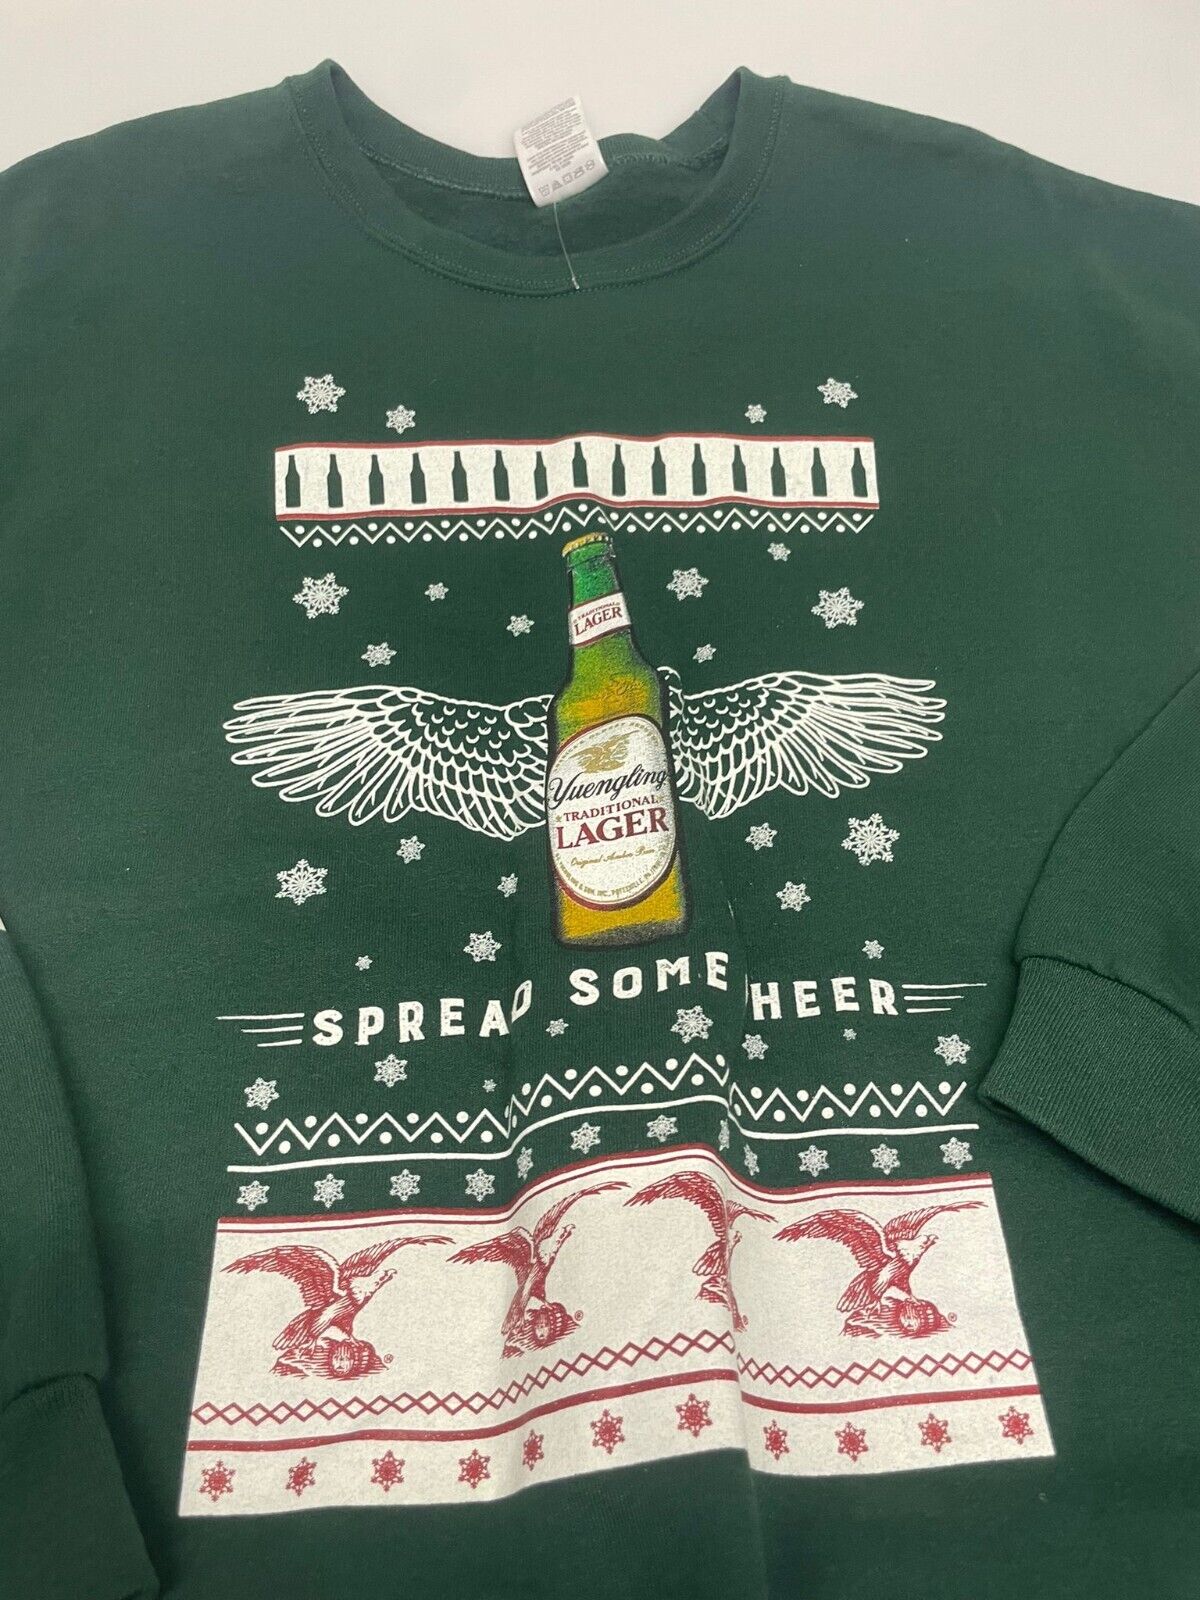 YUENGLING SPREAD SOME CHEER UGLY SWEATER GREEN UNISEX L  